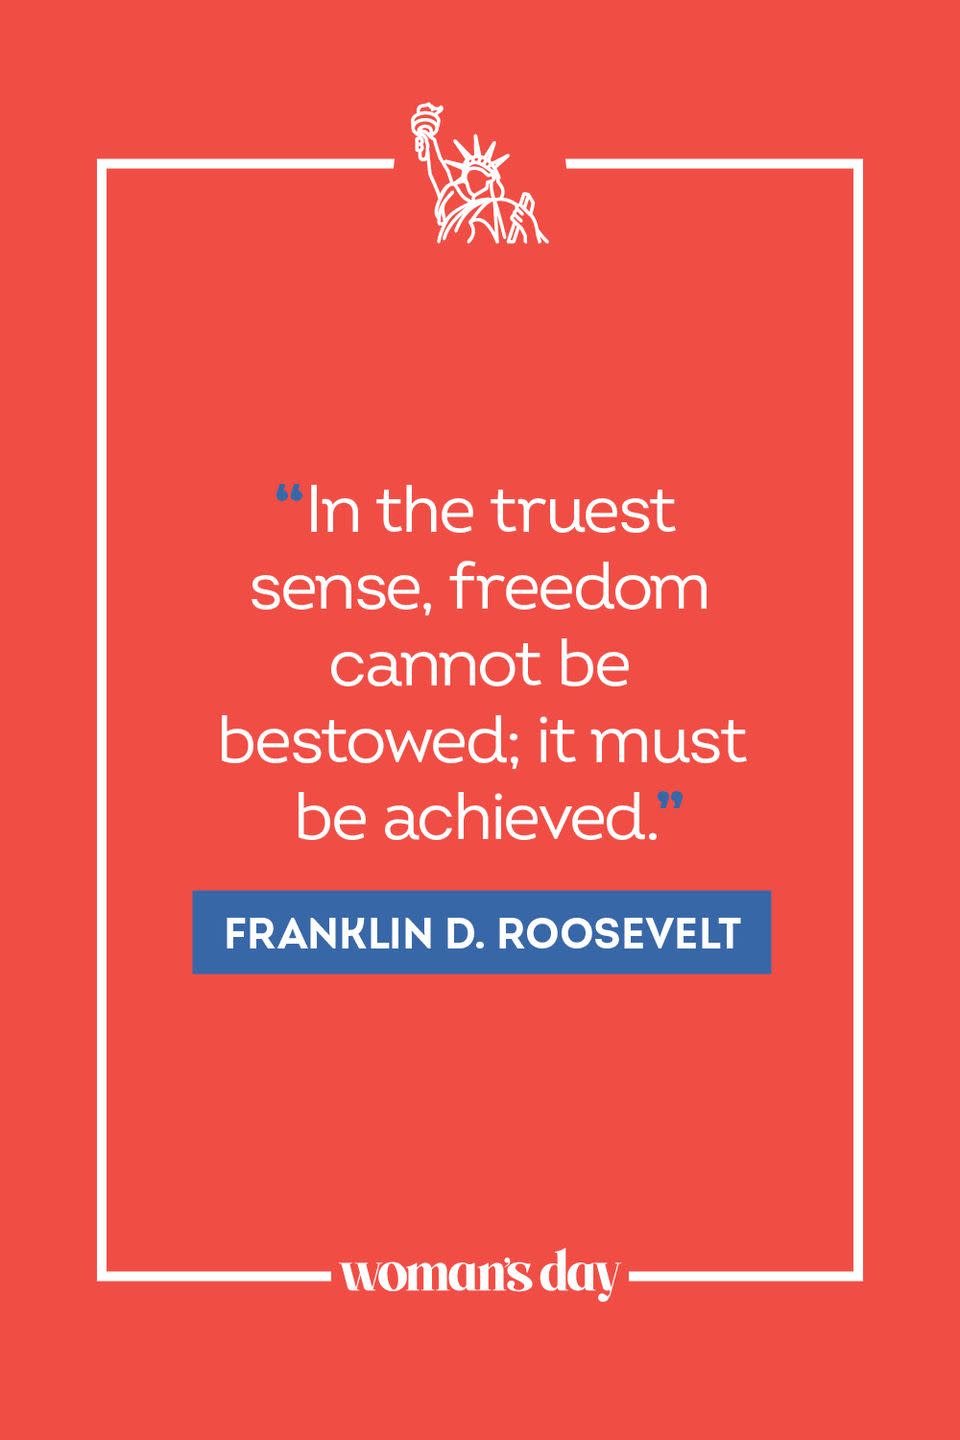 <p>"In the truest sense, freedom cannot be bestowed; it must be achieved." </p>